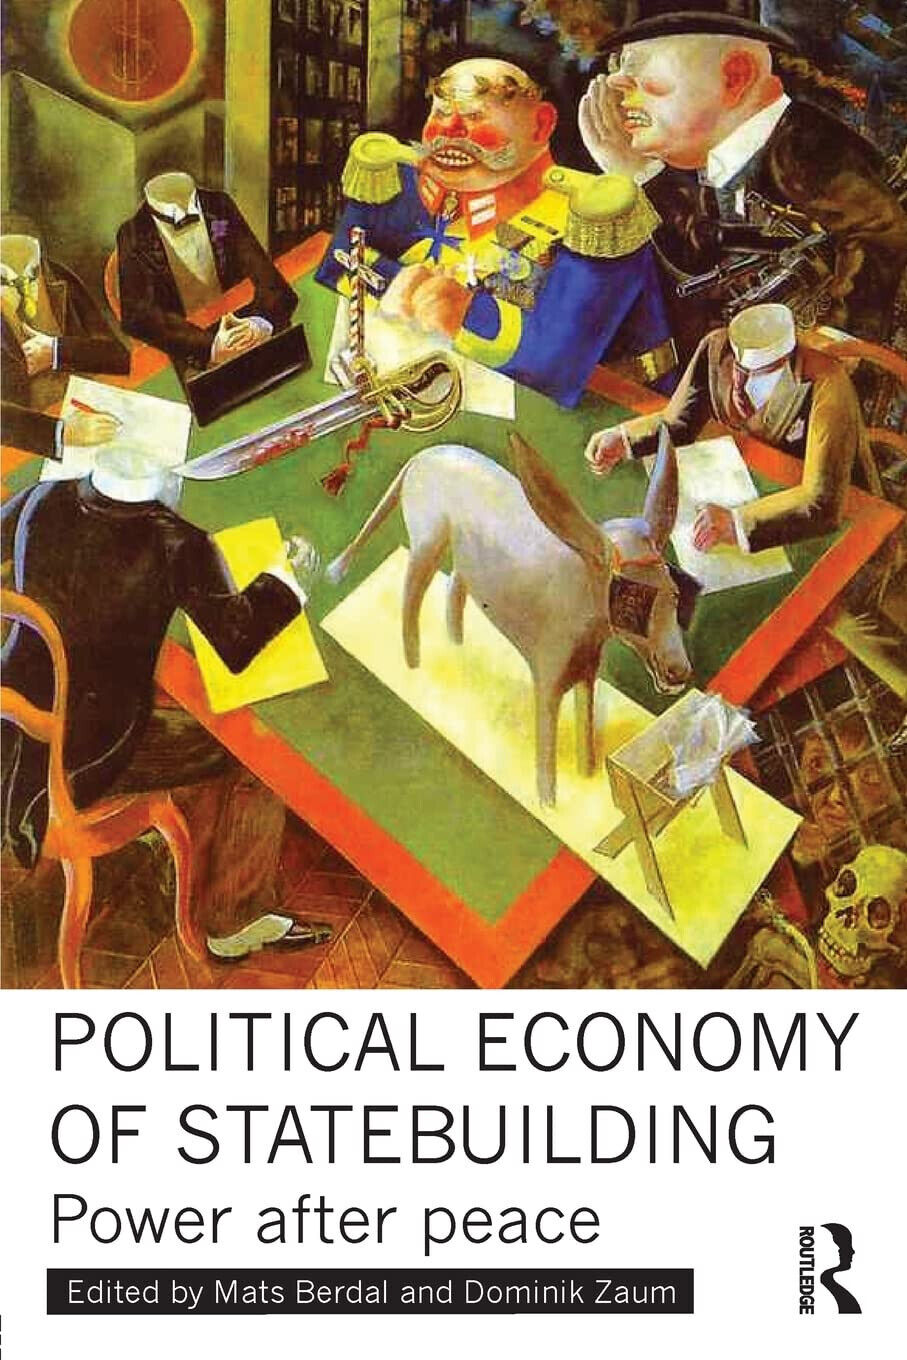 Political Economy of Statebuilding - Mats Berdal - Routledge, 2013